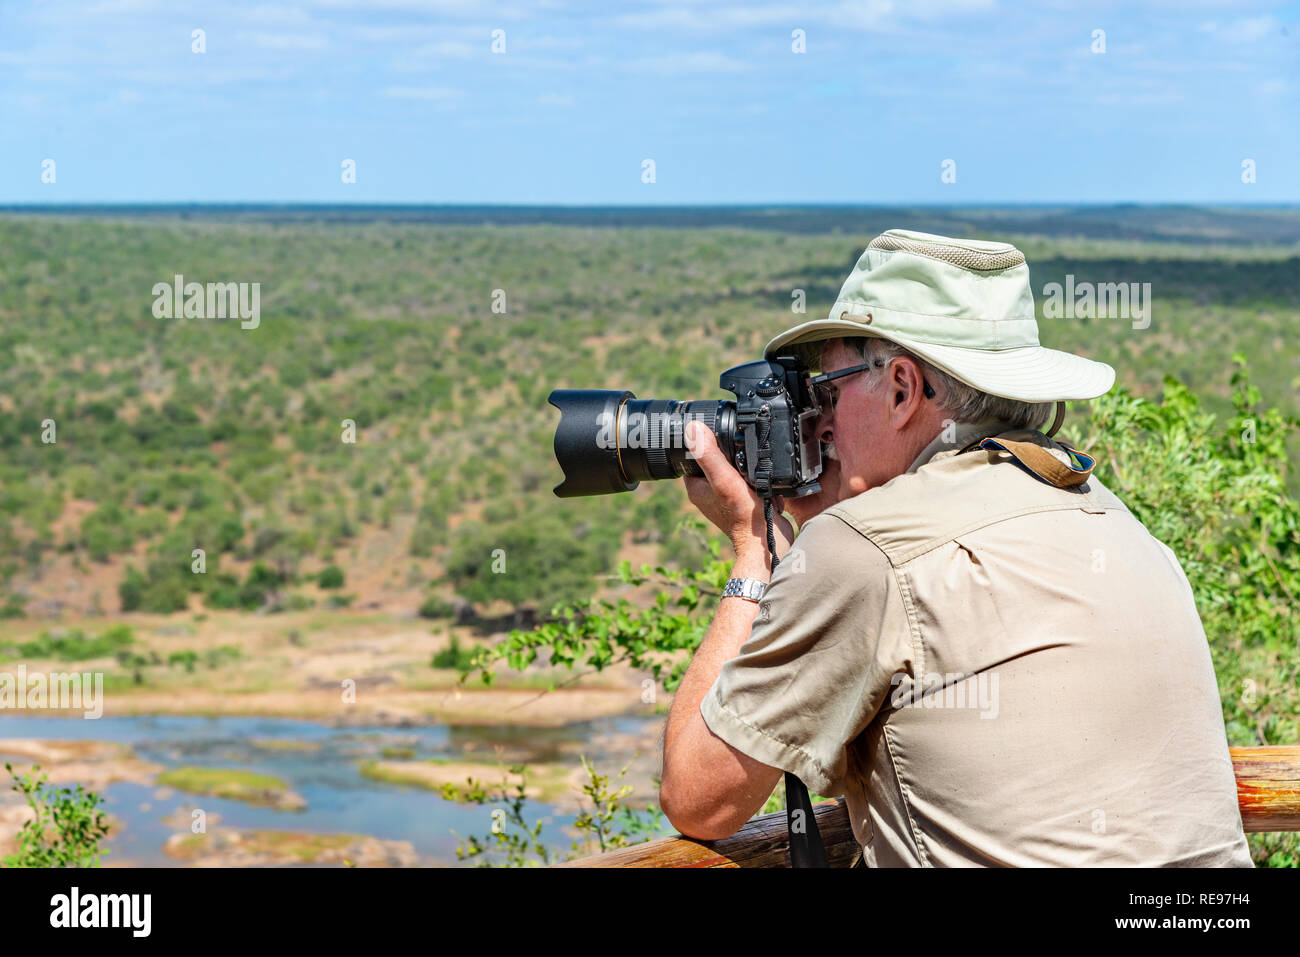 Male photographer on photoshoot overlooking the Olifants River, Kruger National Park, South Africa Stock Photo